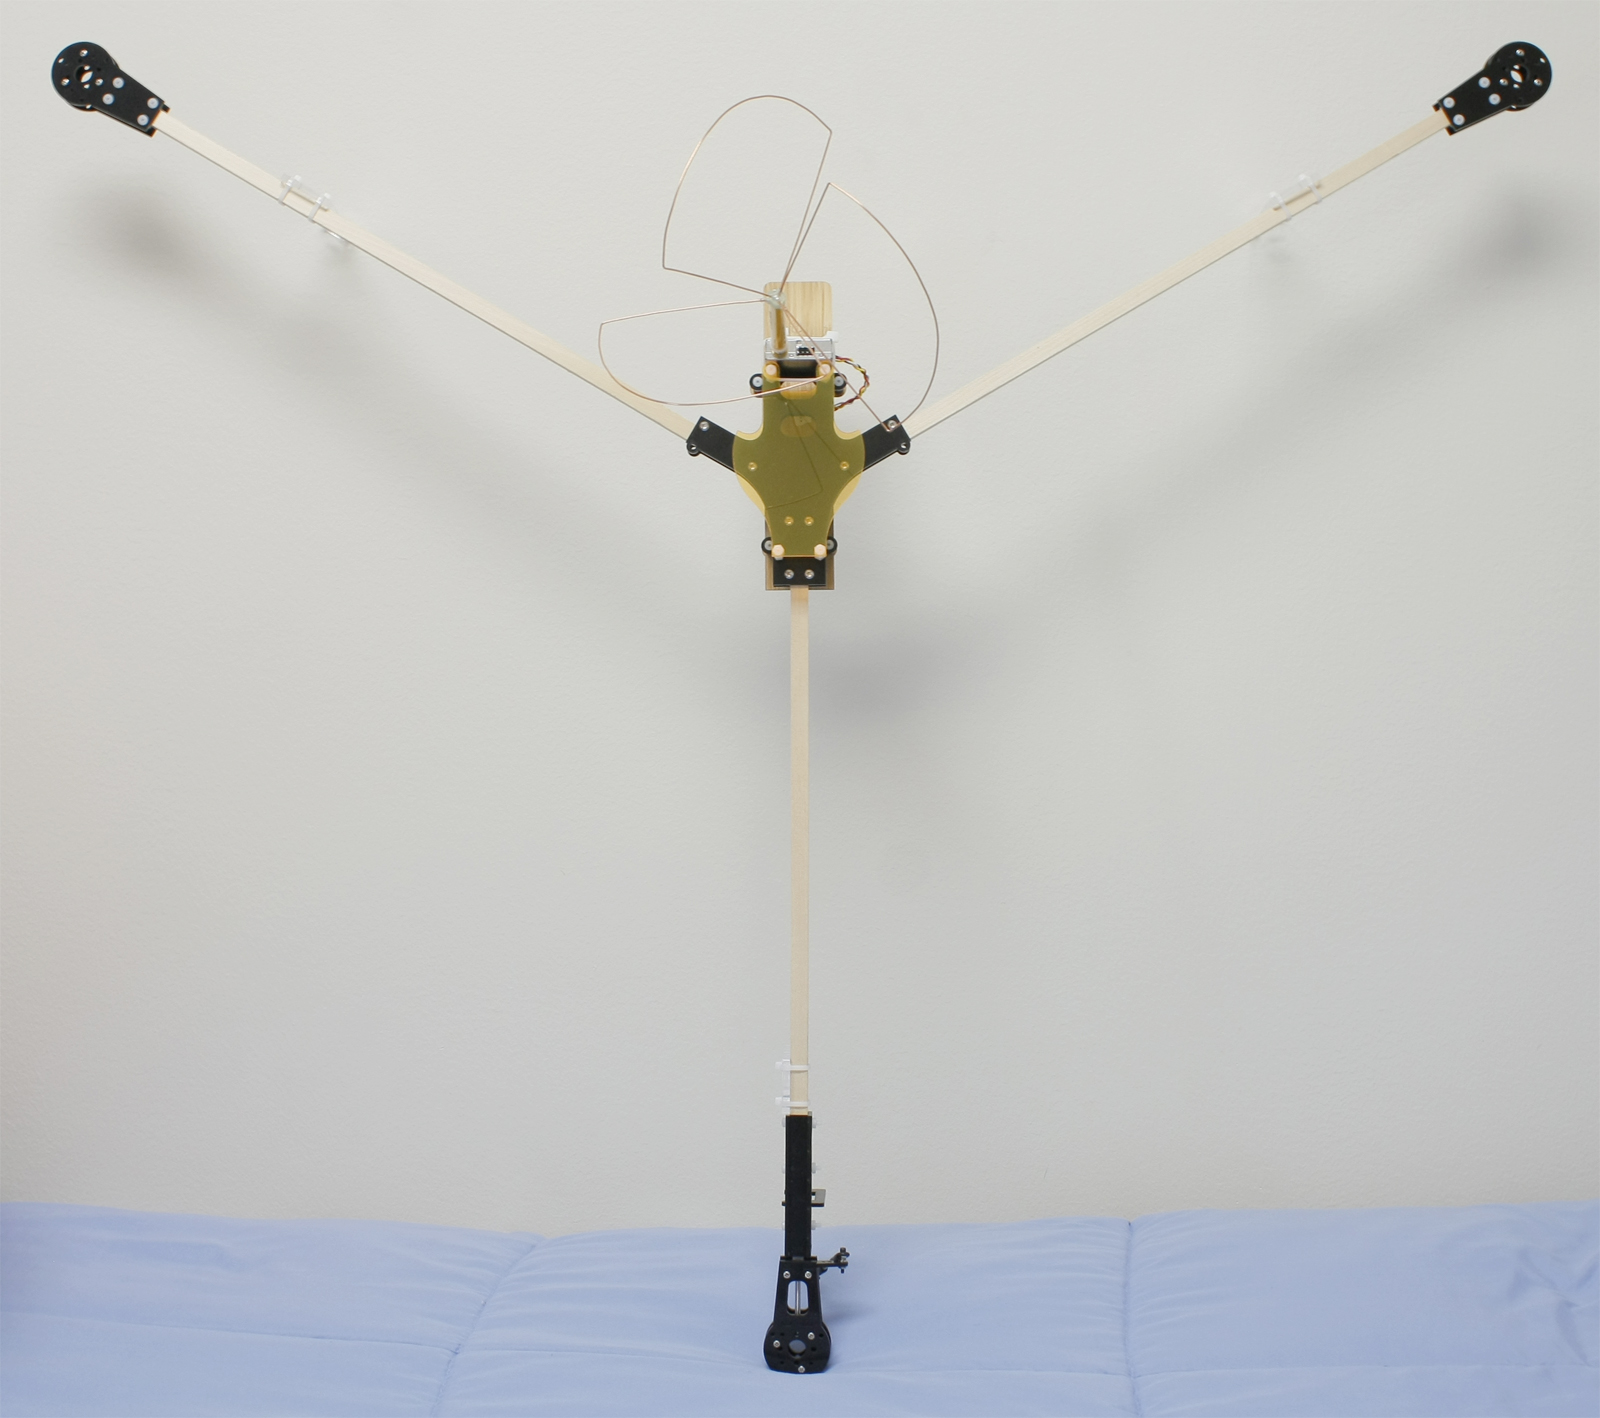 Tricopter frame with video transmitter and cloverleaf antenna mounted